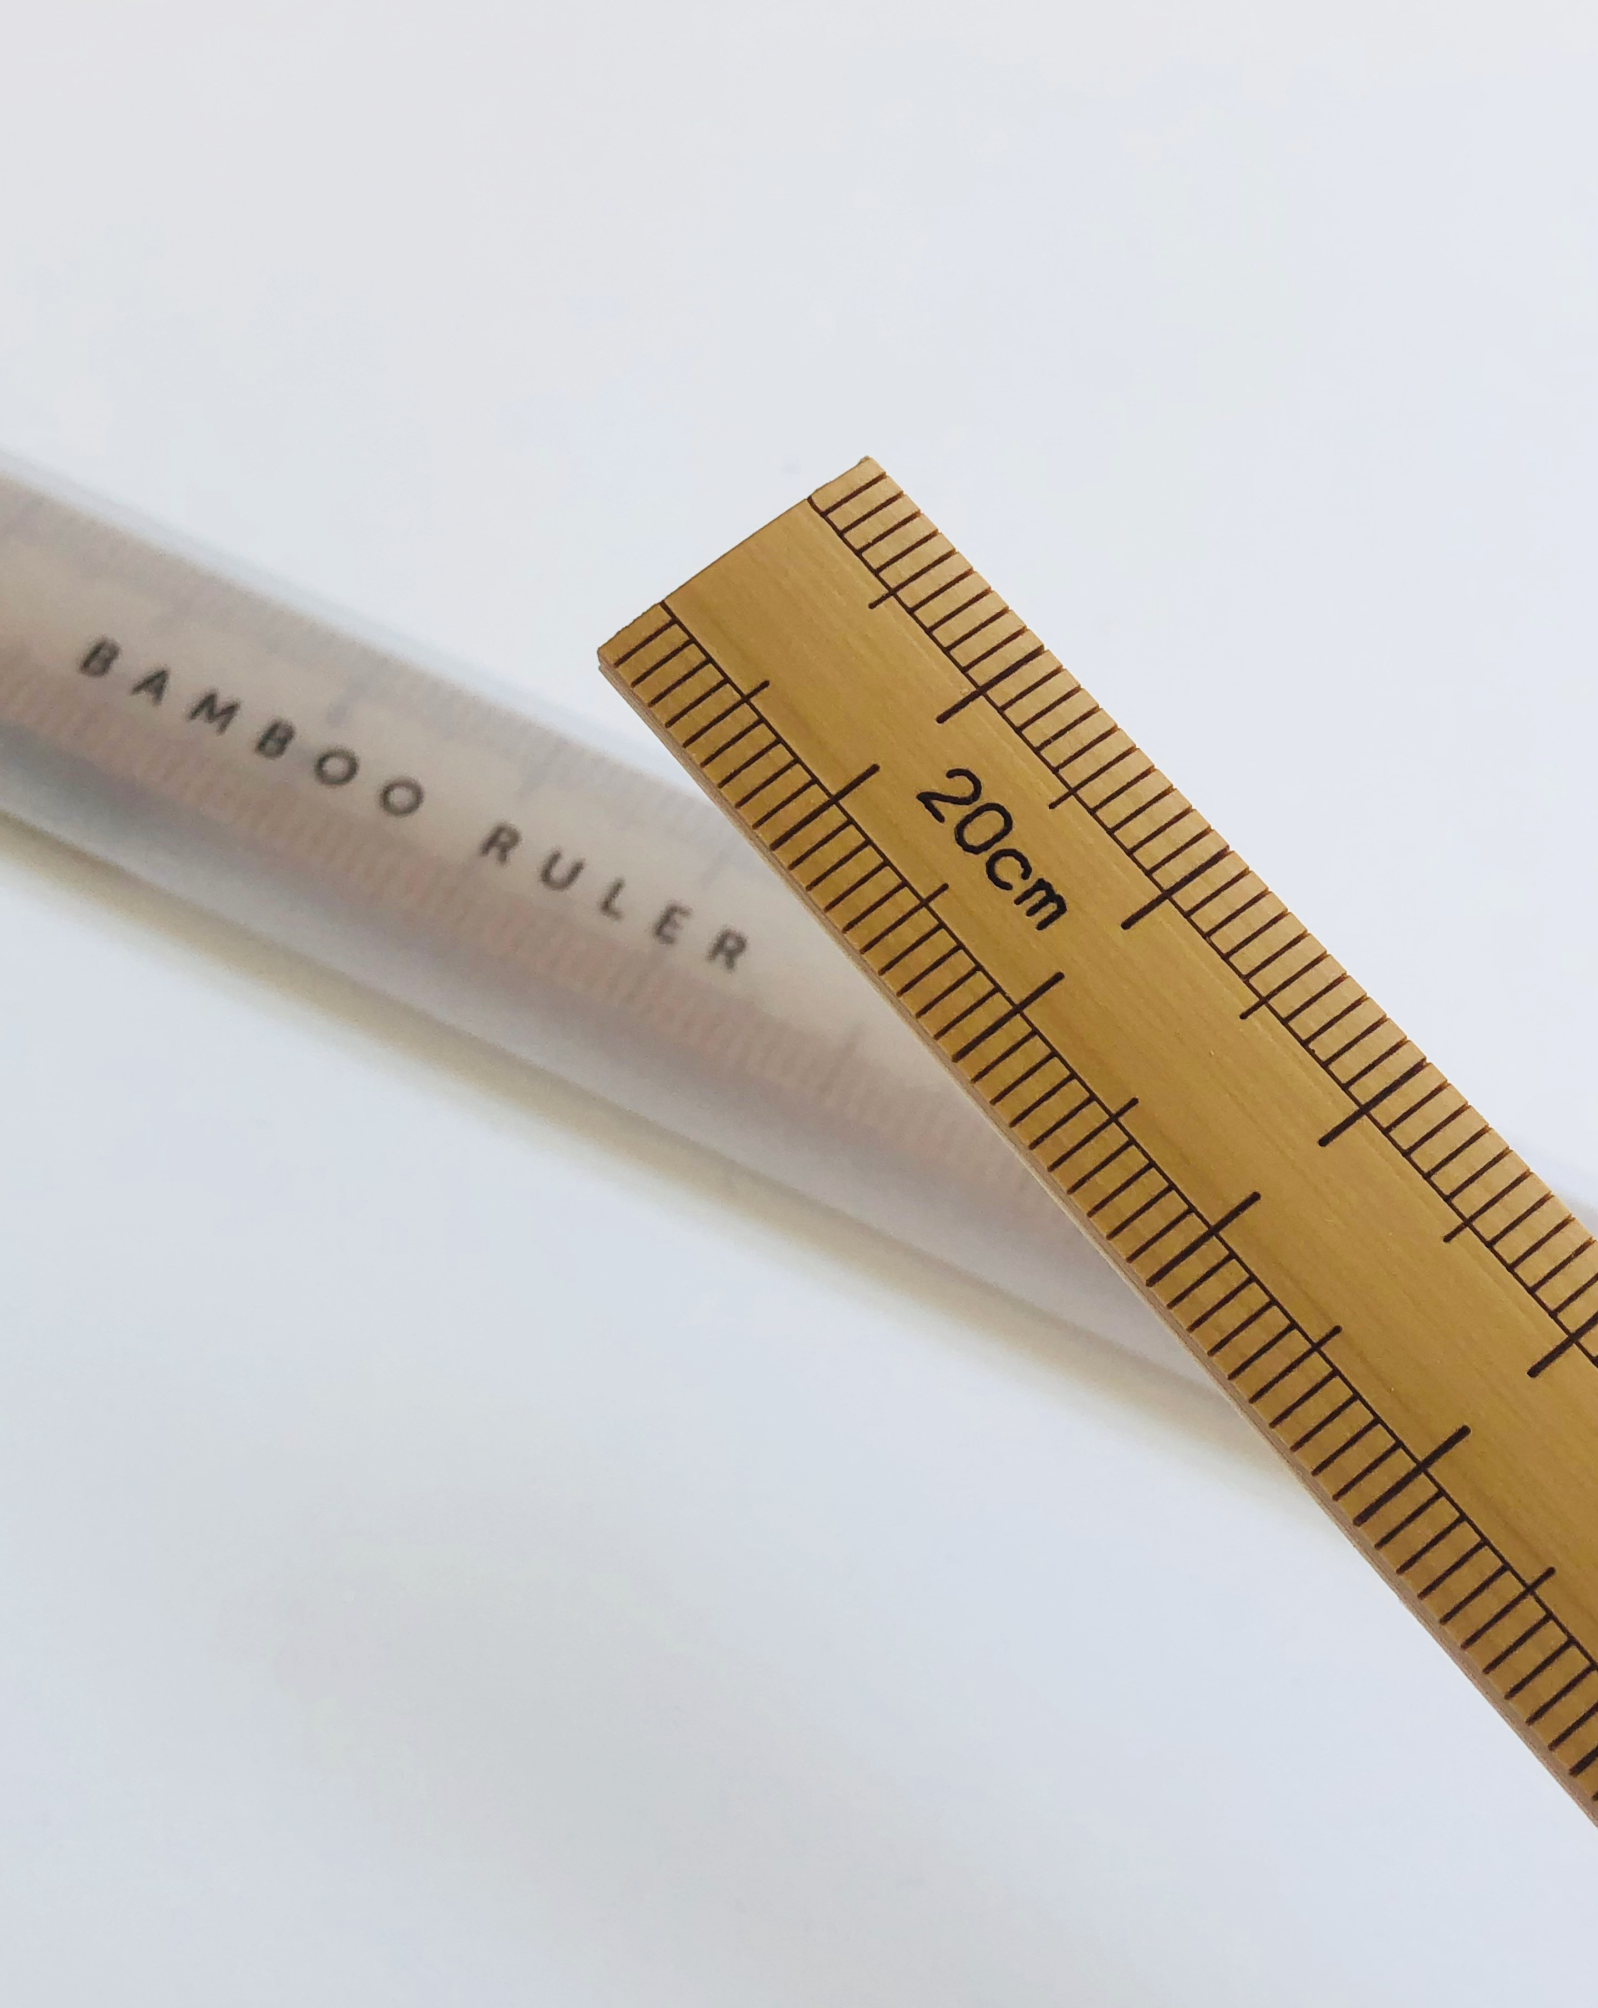 MADE IN JAPAN Japanese Bamboo Rule Small Ruler Scale 20cm 200mm